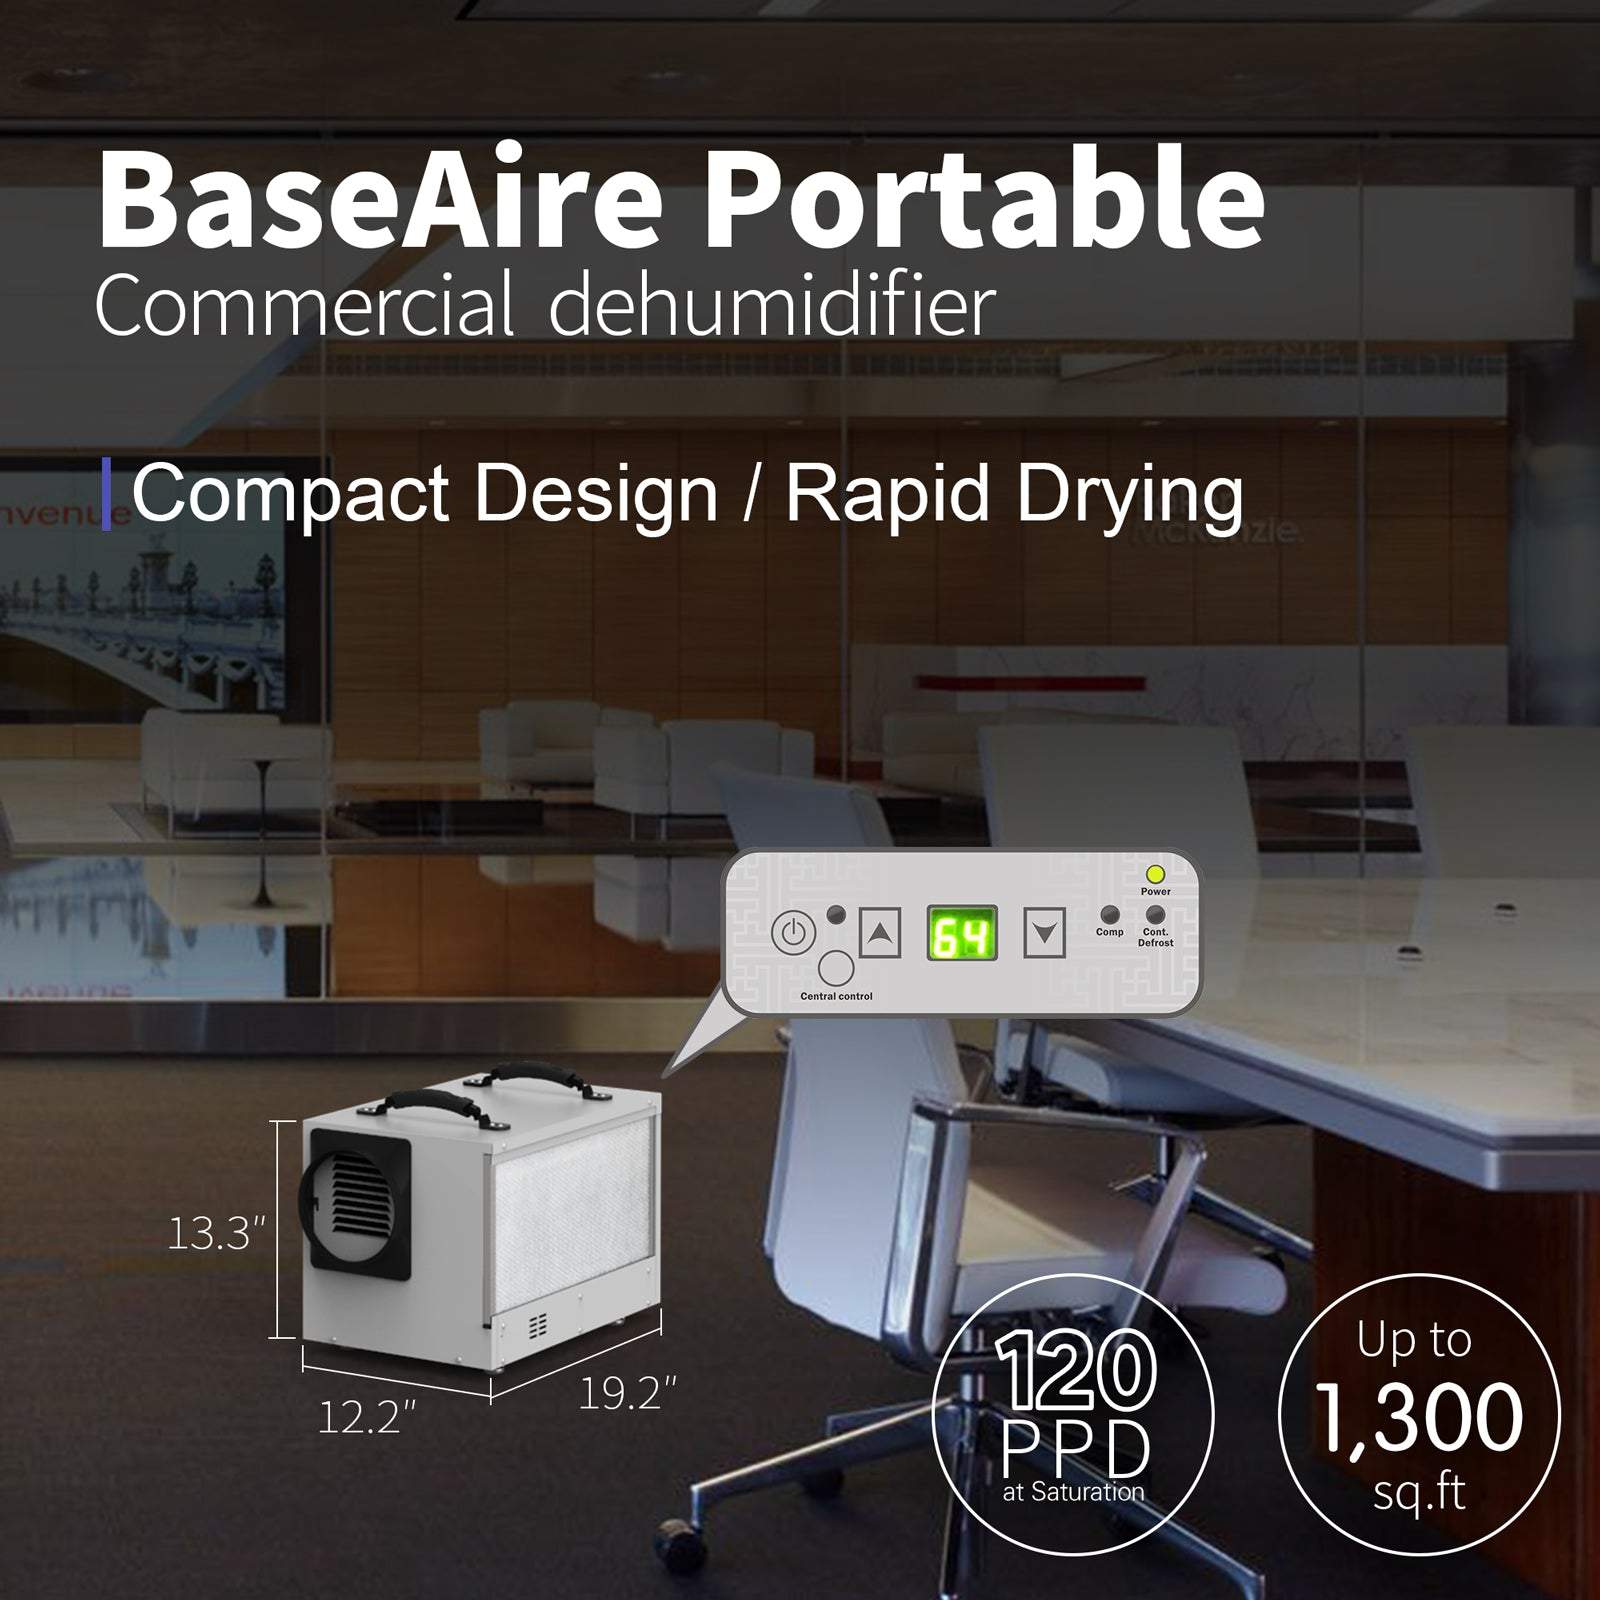 BaseAire 113 PPD Crawl Space Dehumidifier, Crawlspace Dehumidifiers Commercial Dehu for Home and Basements - Crawl Space dehumidifier from [store] by Baseaire - 